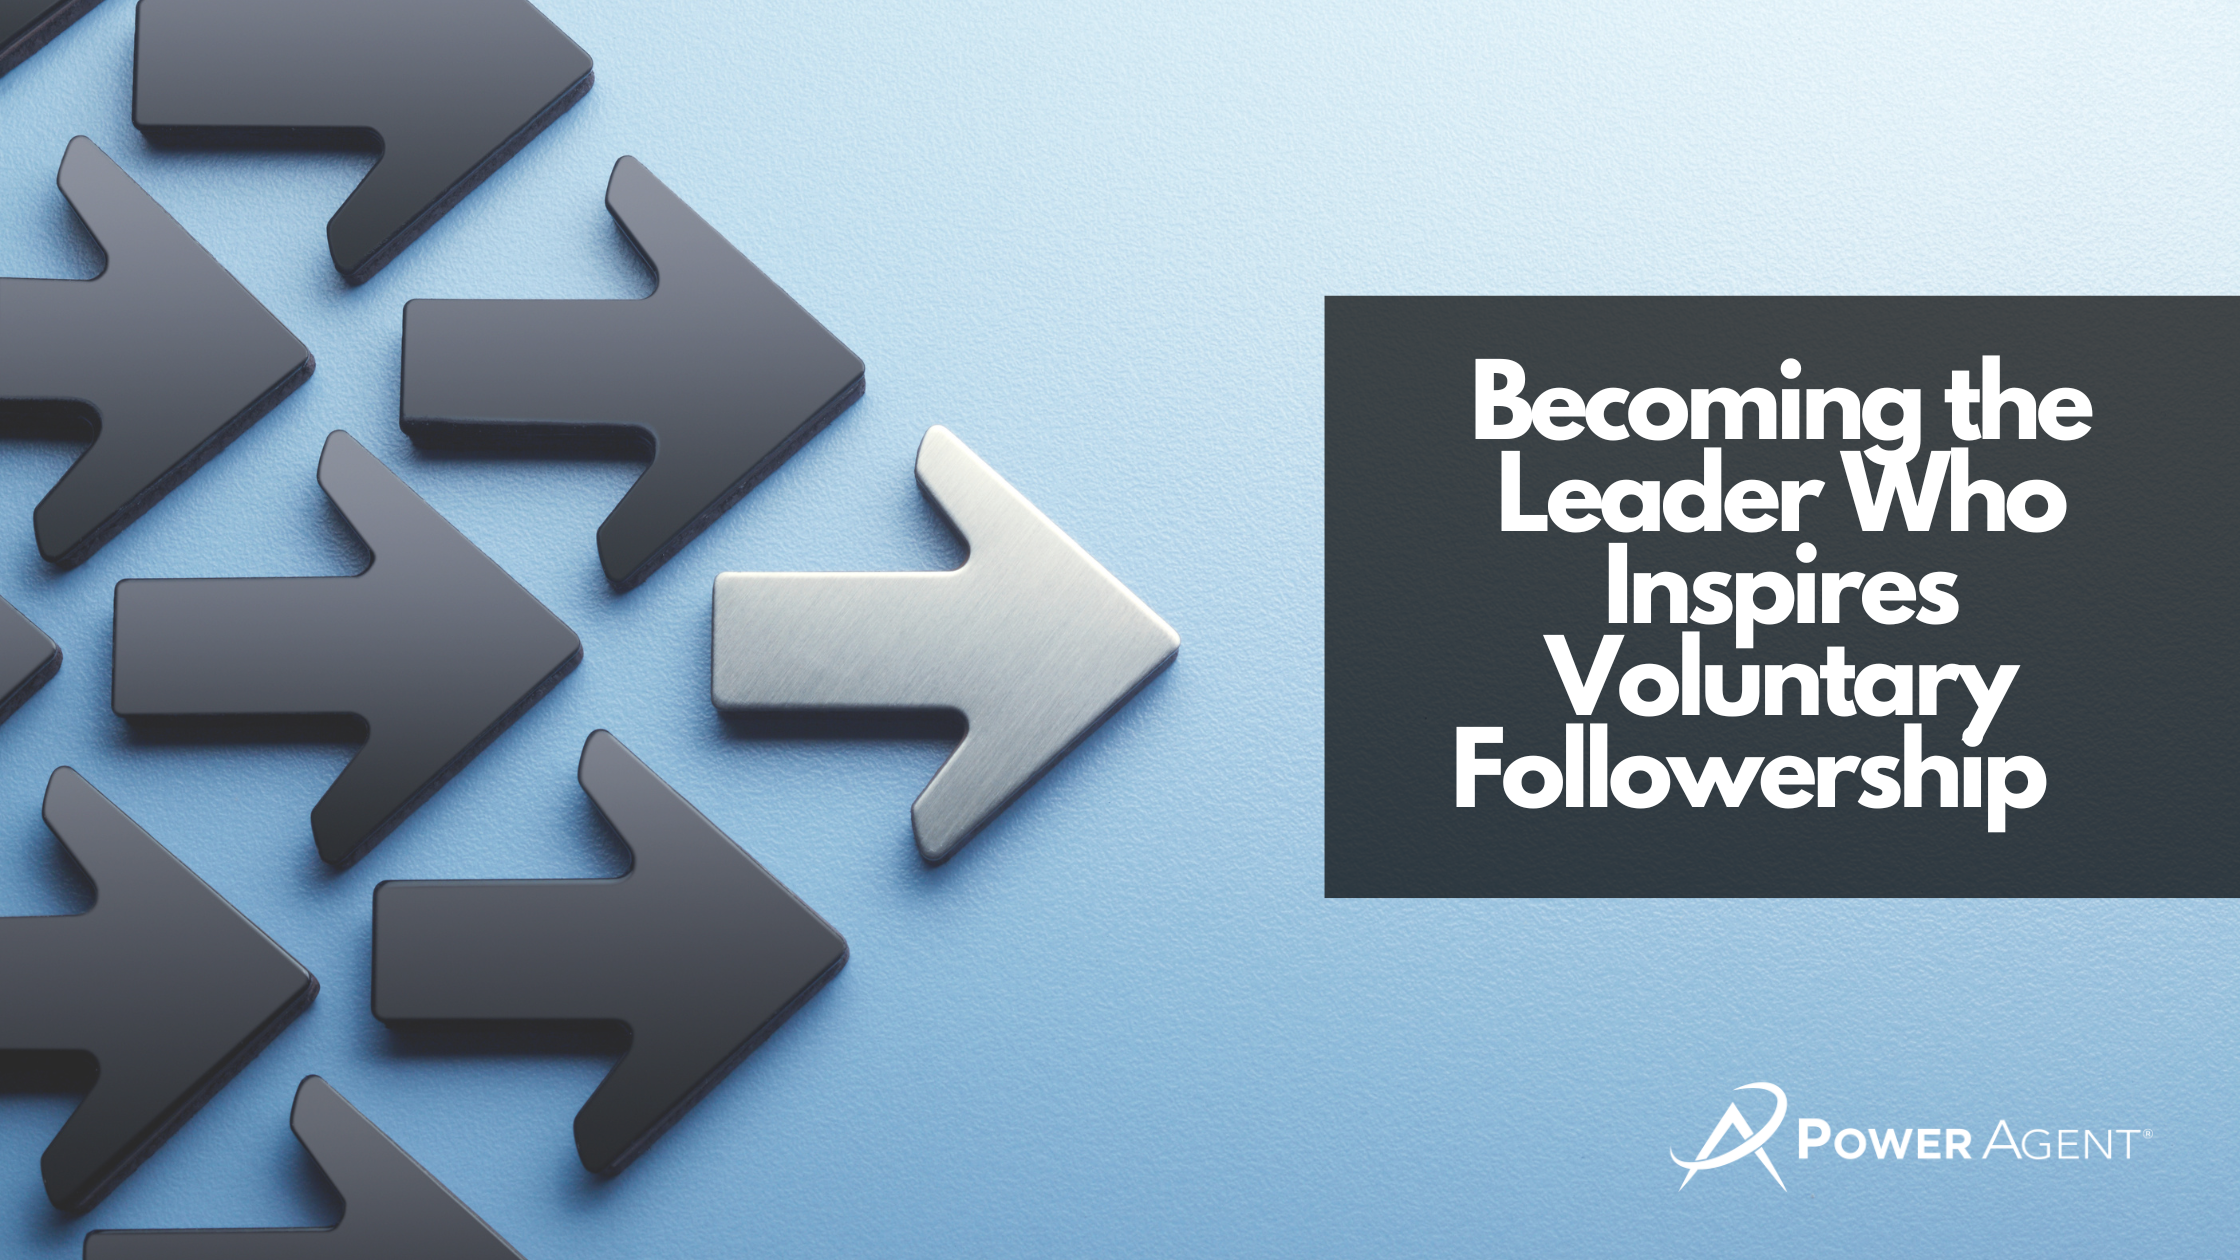 Becoming the Leader Who Inspires Voluntary Followership